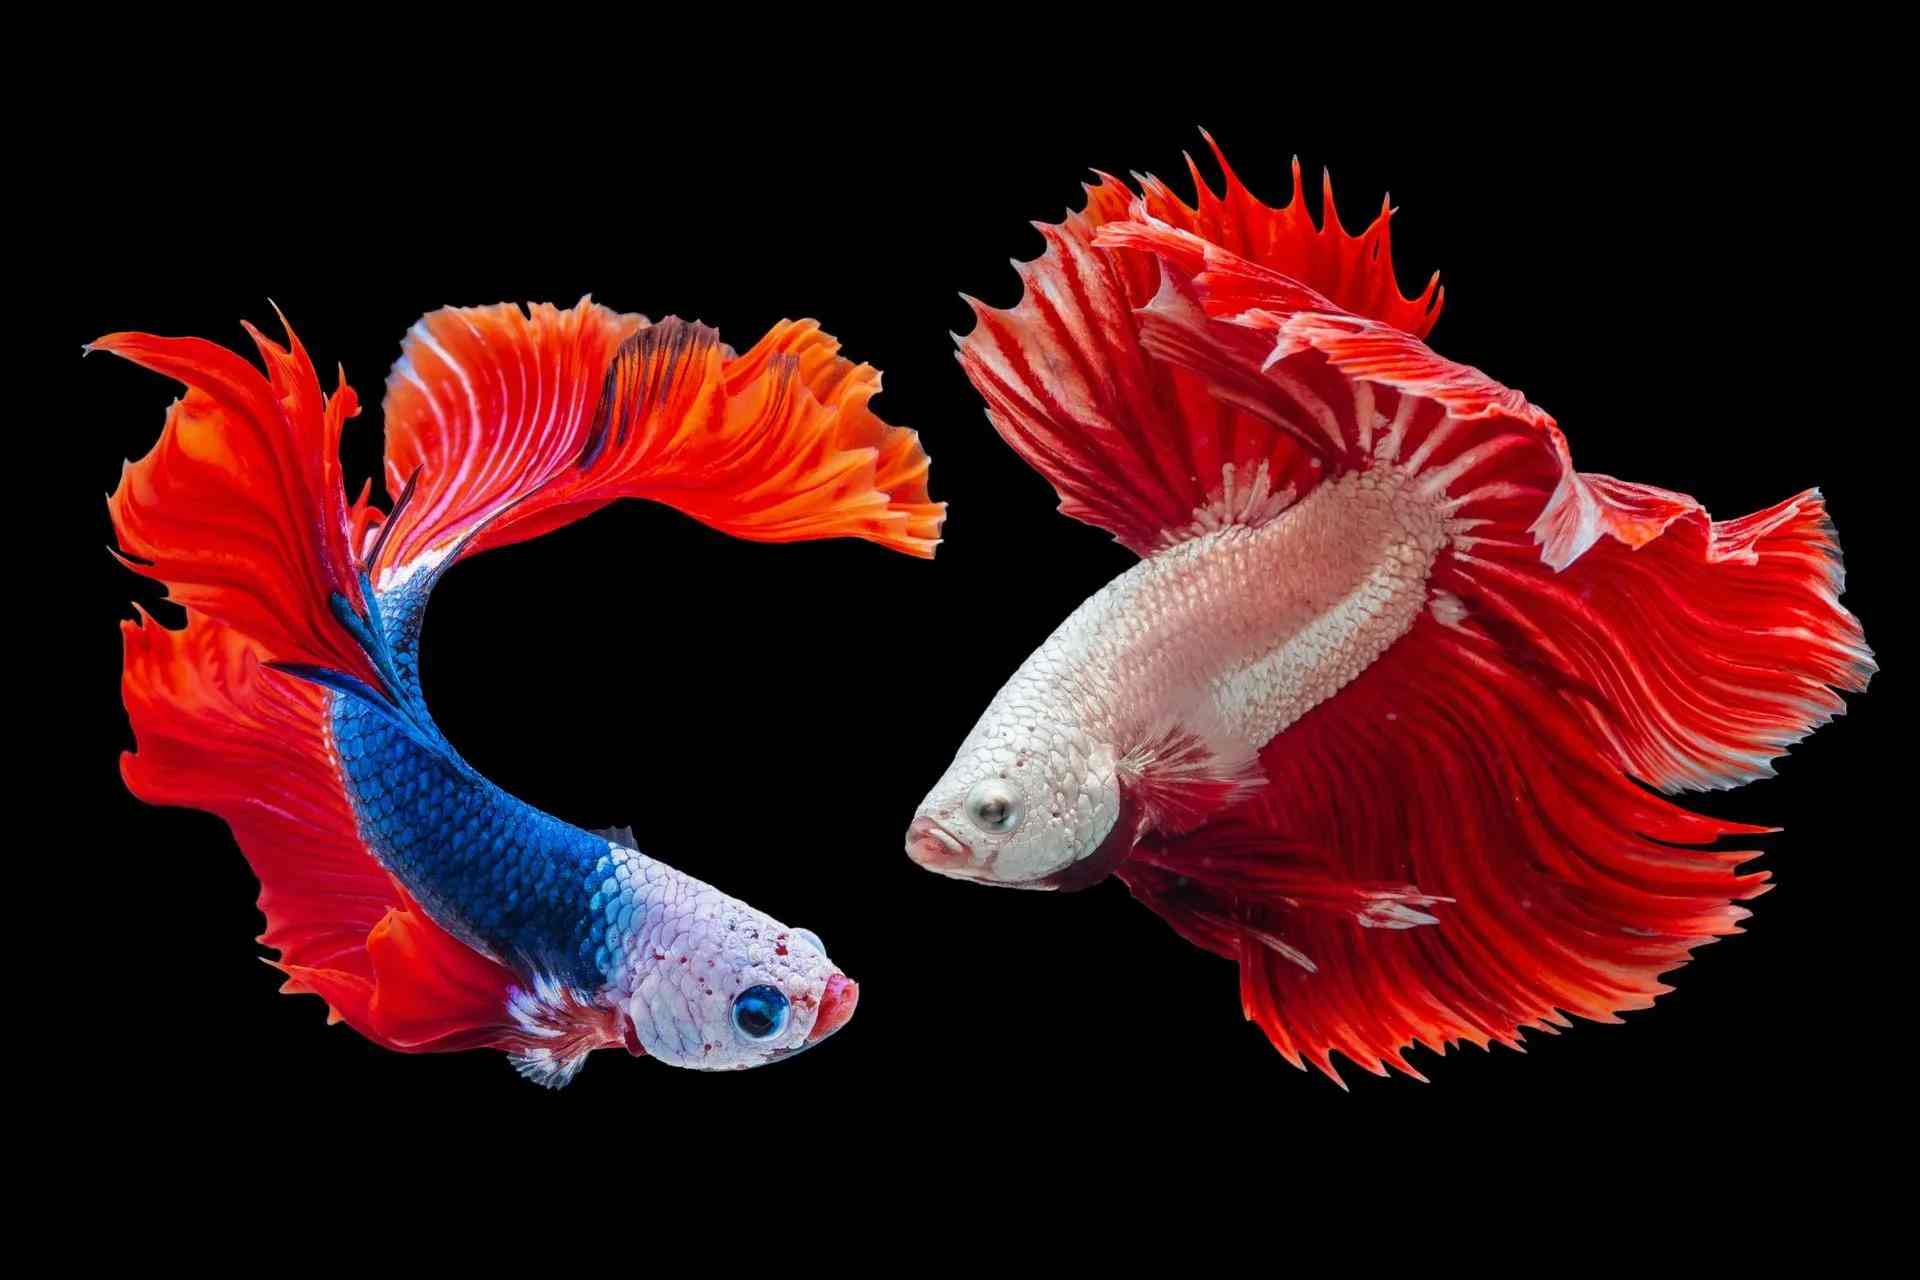 Blue and white betta fishes.  